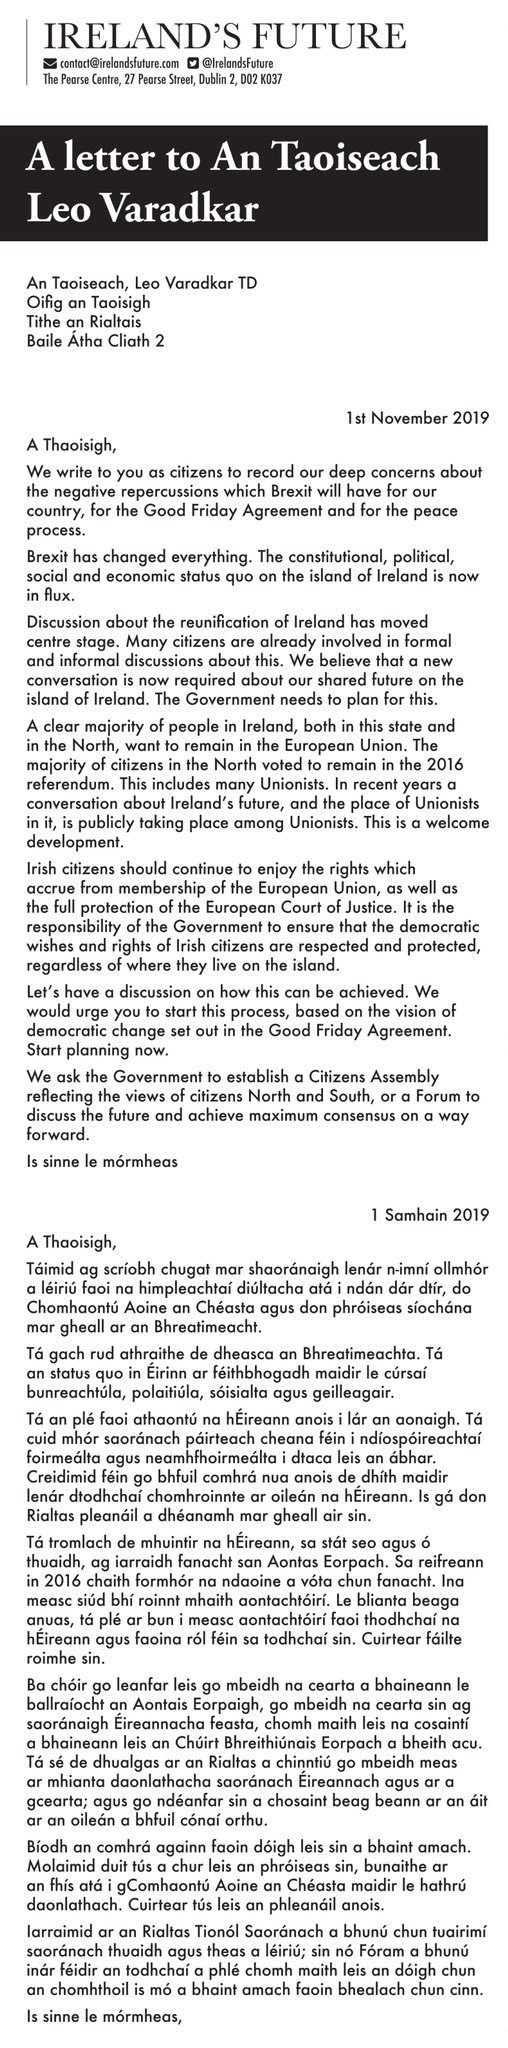 Screenshot of the letter to Leo Varadkar in the Irish Times. 